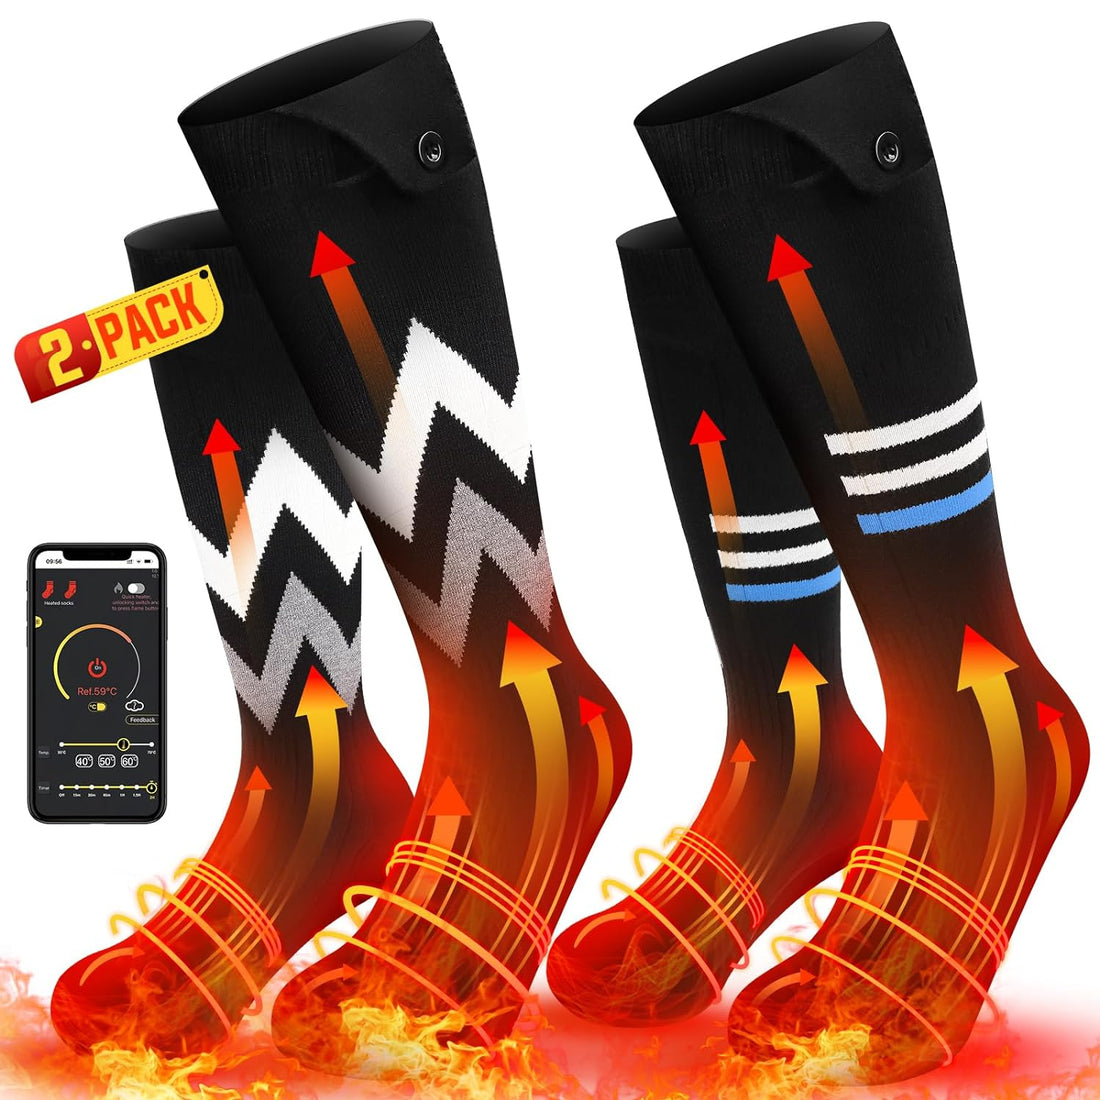 Rechargeable Heated Socks for Men Women, Rechargeable Foot Warmer with APP Remote Control 5000mAh Battery Heated Socks Women Fast Heat, Electric Heated Socks for Sports Skiing Riding Fishing